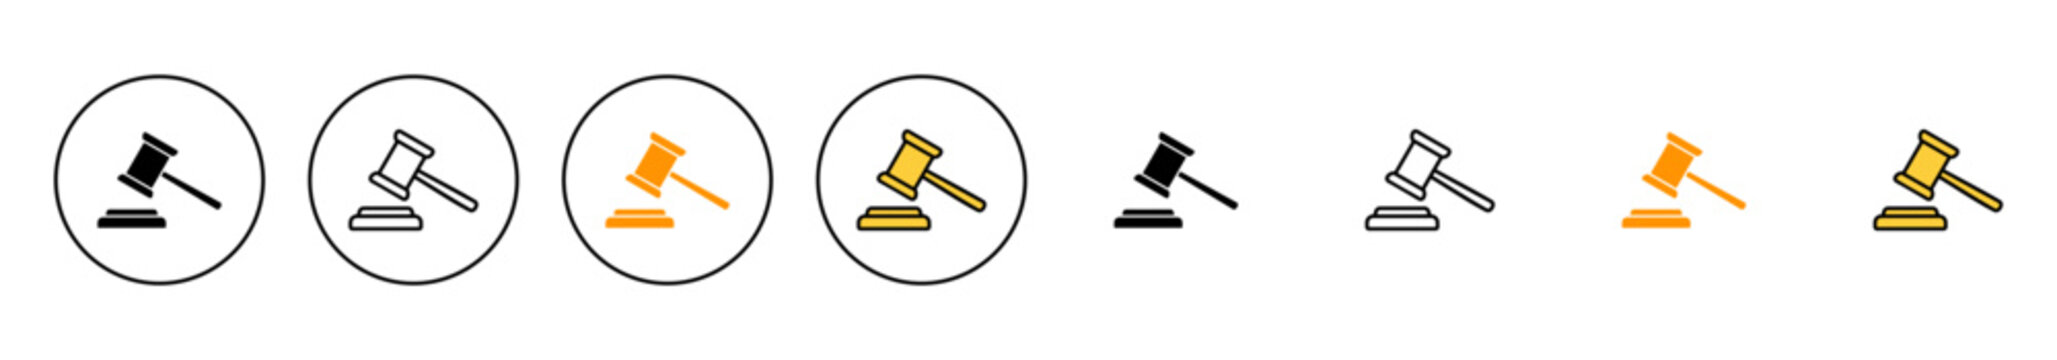 Gavel icon set vector. judge gavel sign and symbol. law icon. auction hammer